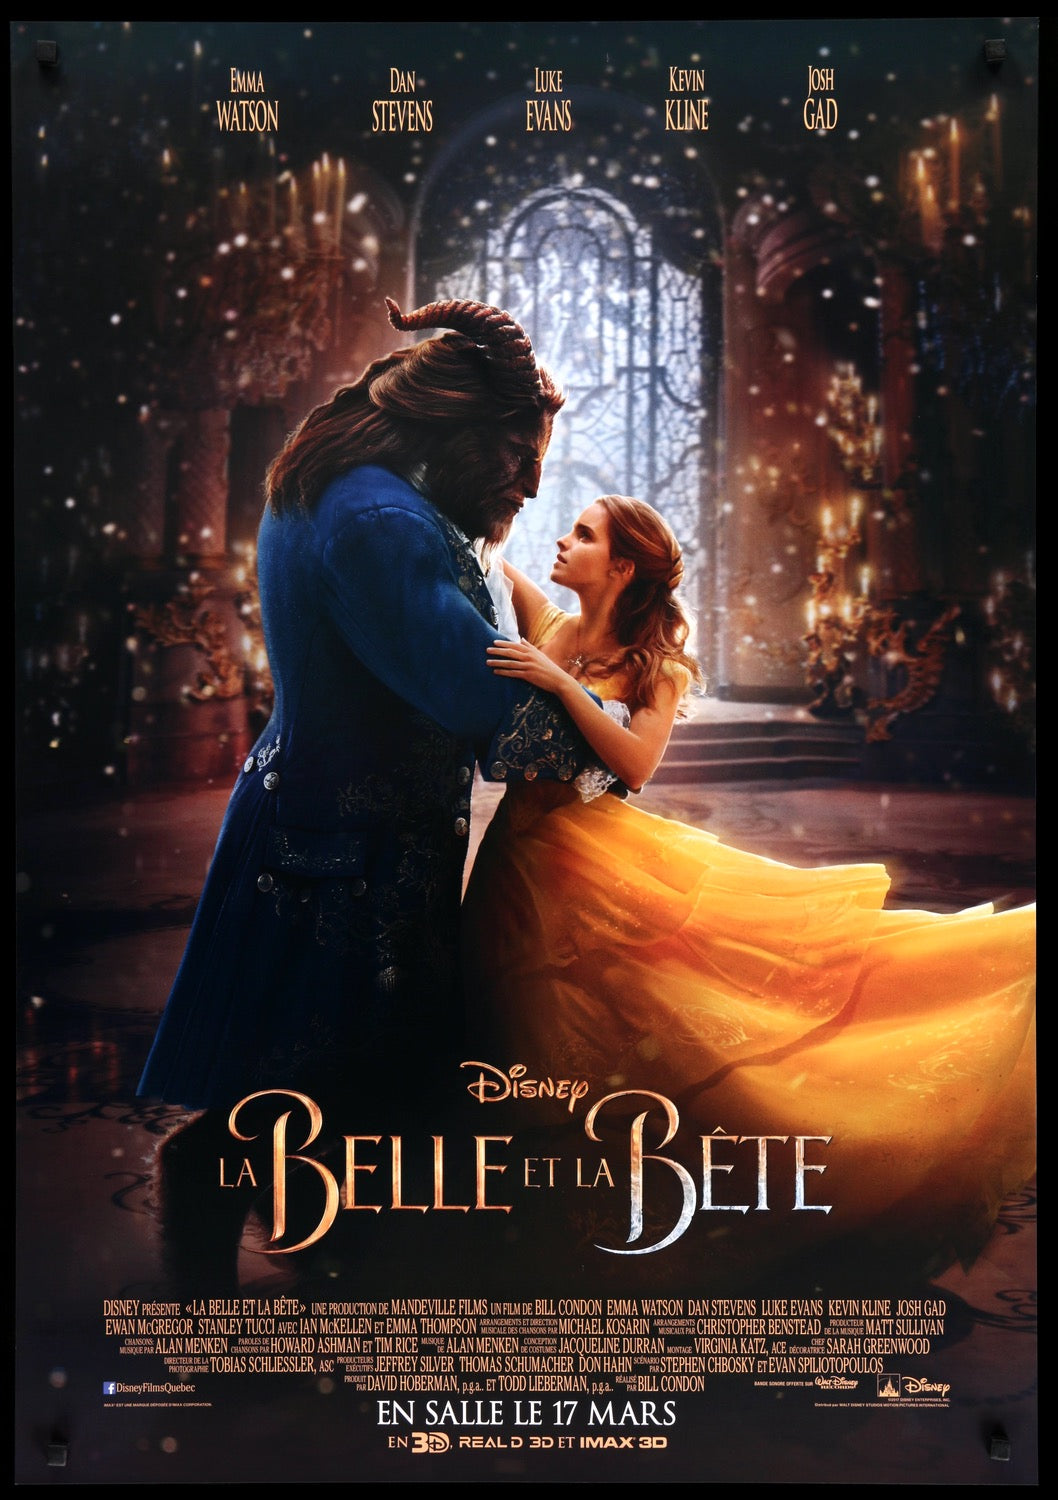 Beauty and the Beast (2017) original movie poster for sale at Original Film Art